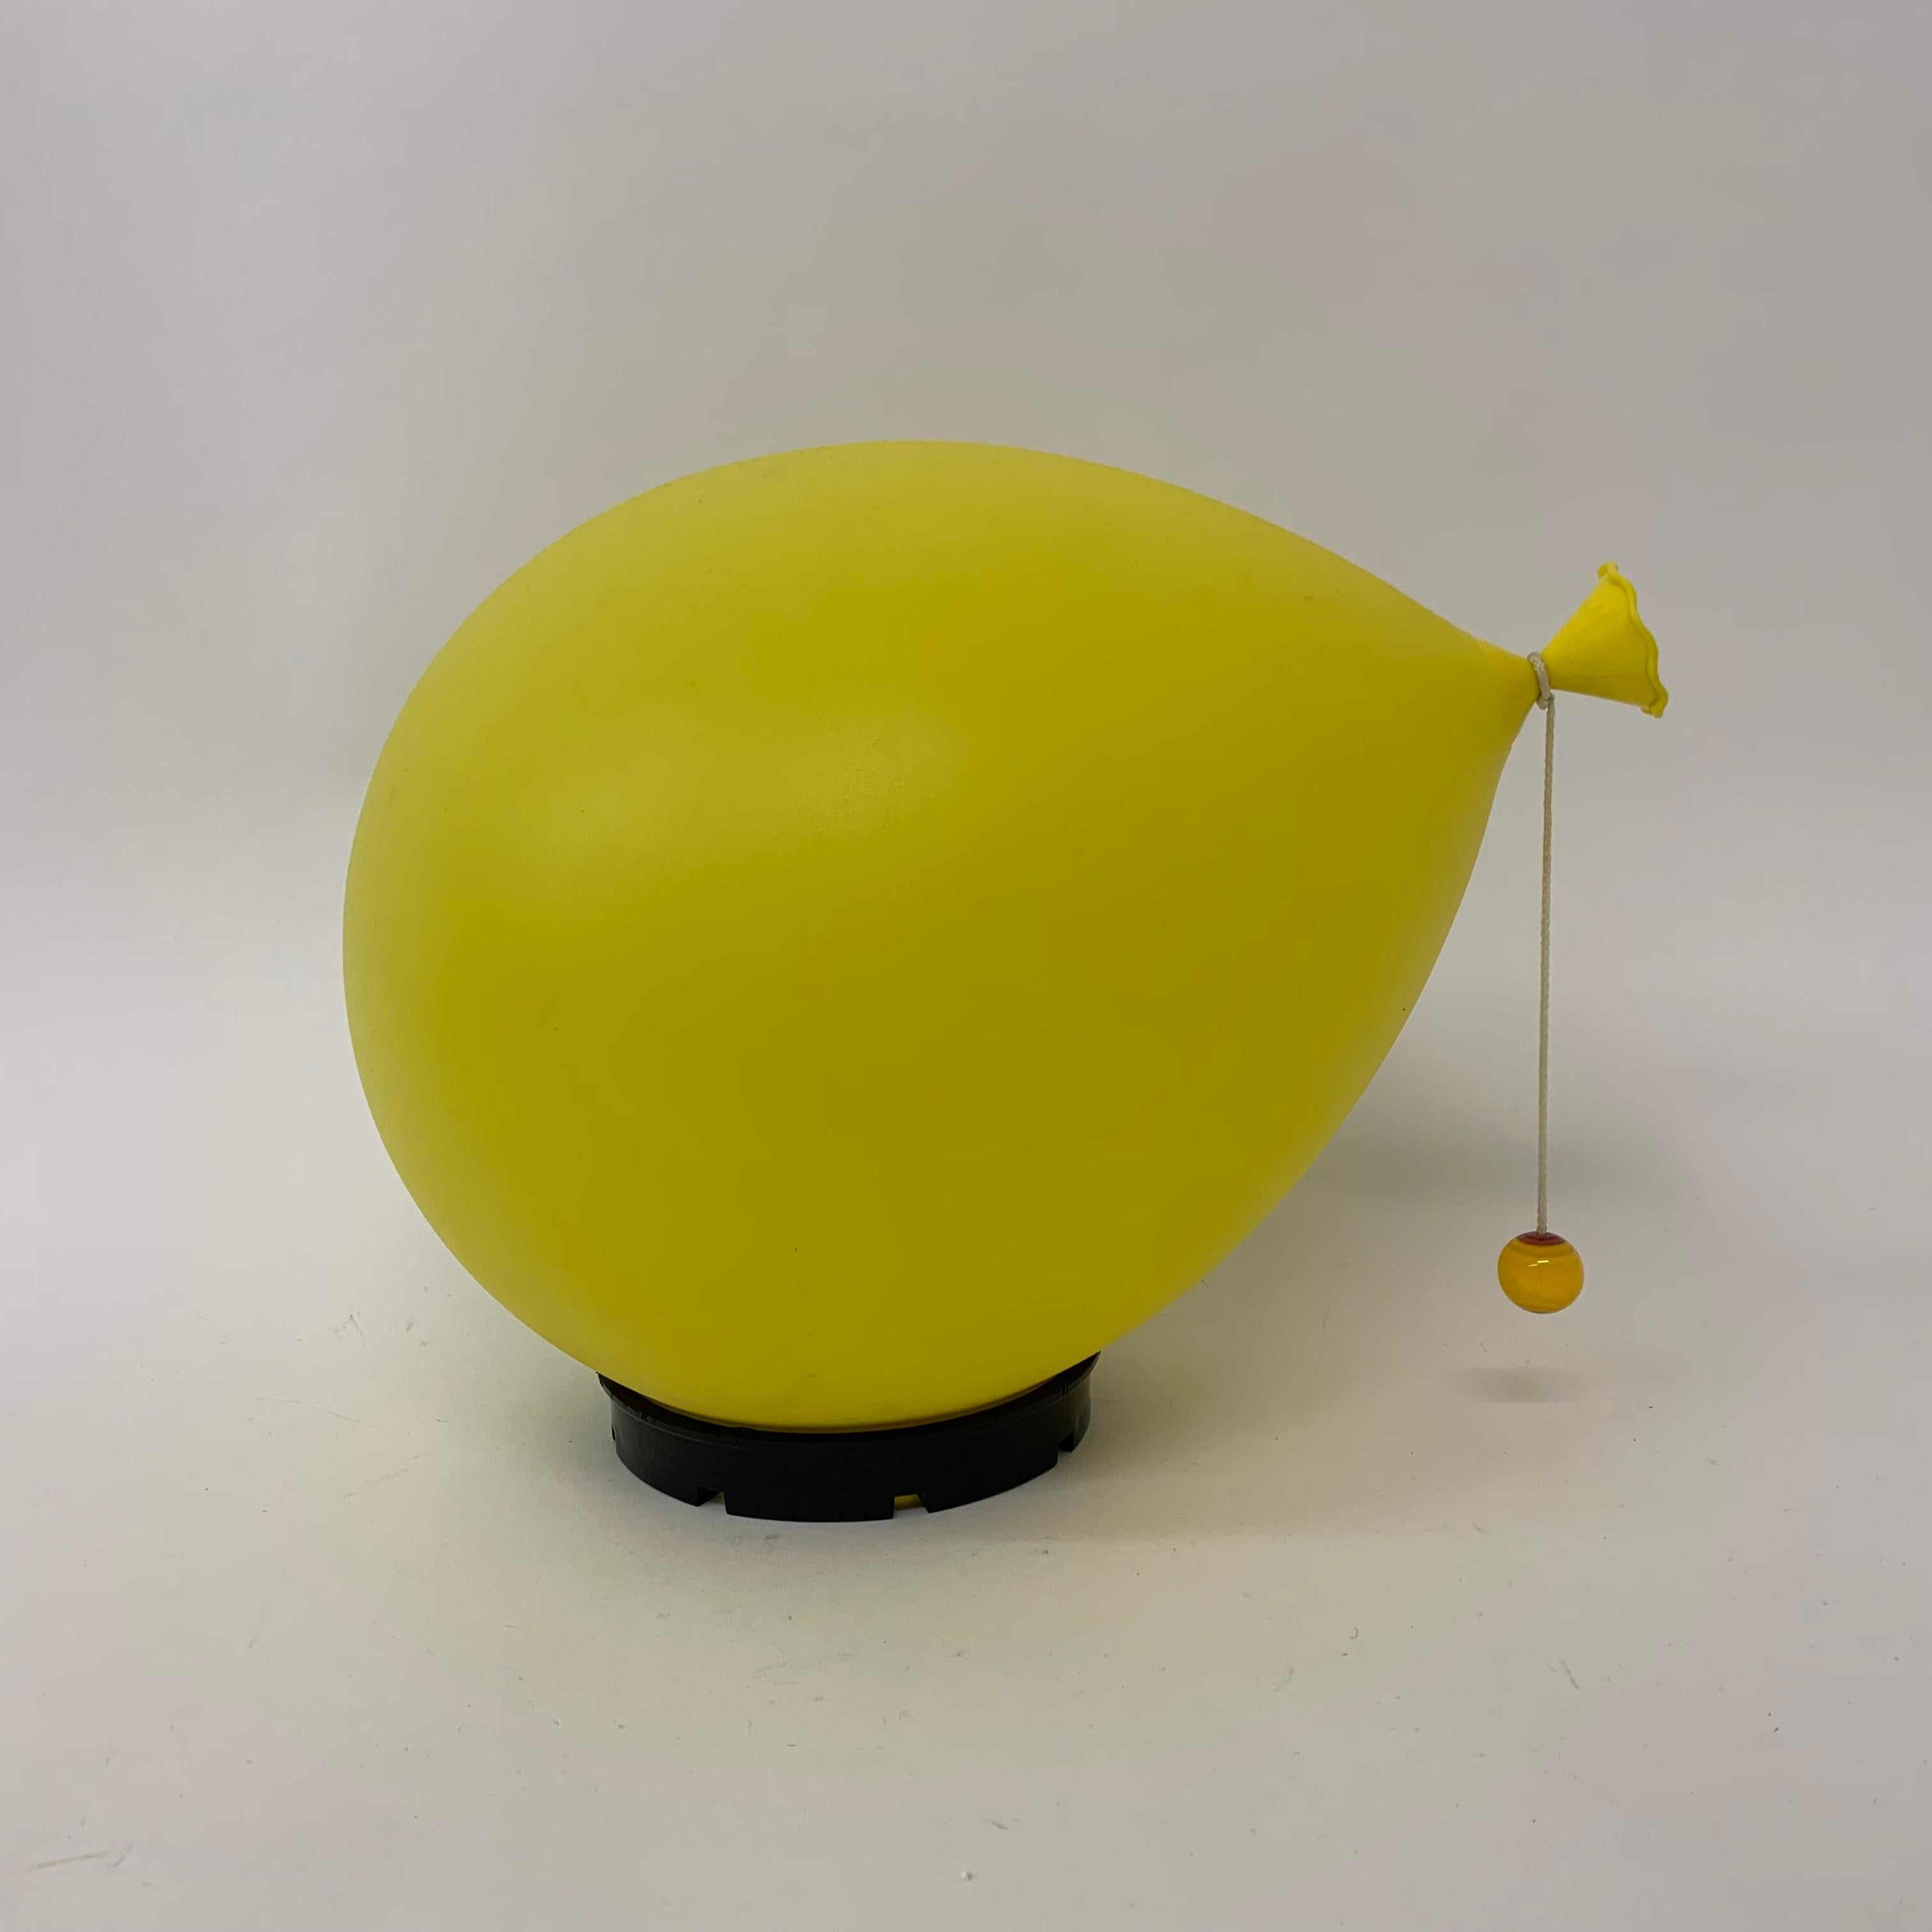 Great lamp can be used as a table lamp, wall lamp or celling lamp. It gives the illusion of a uprising balloon.